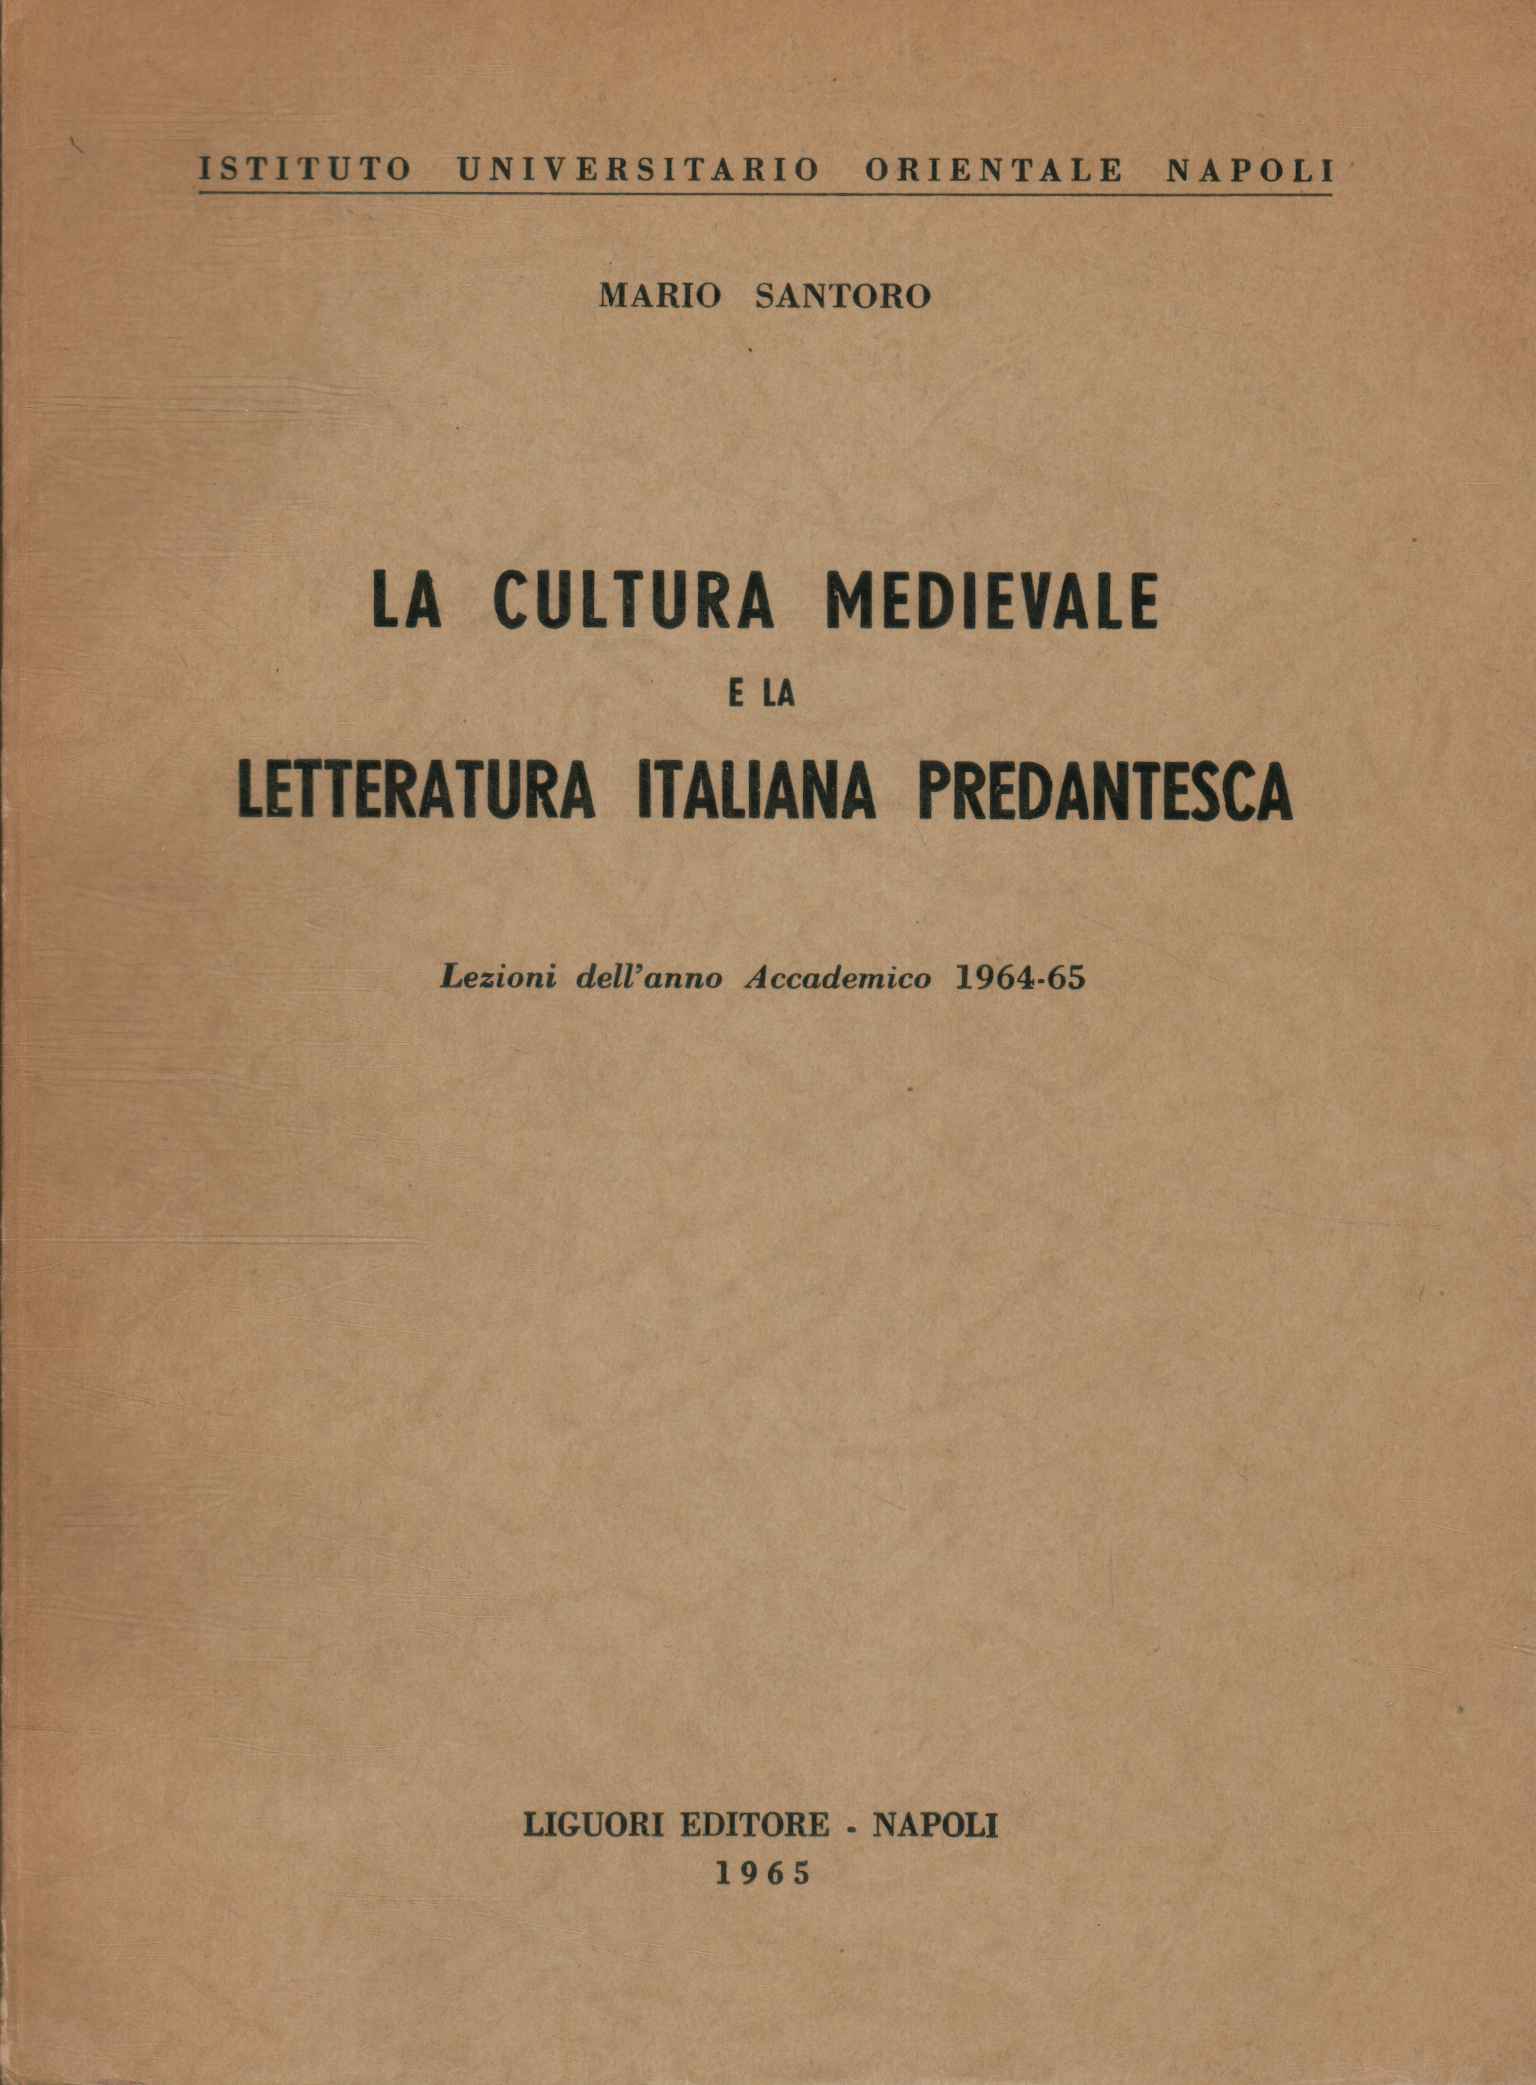 Medieval culture and literature